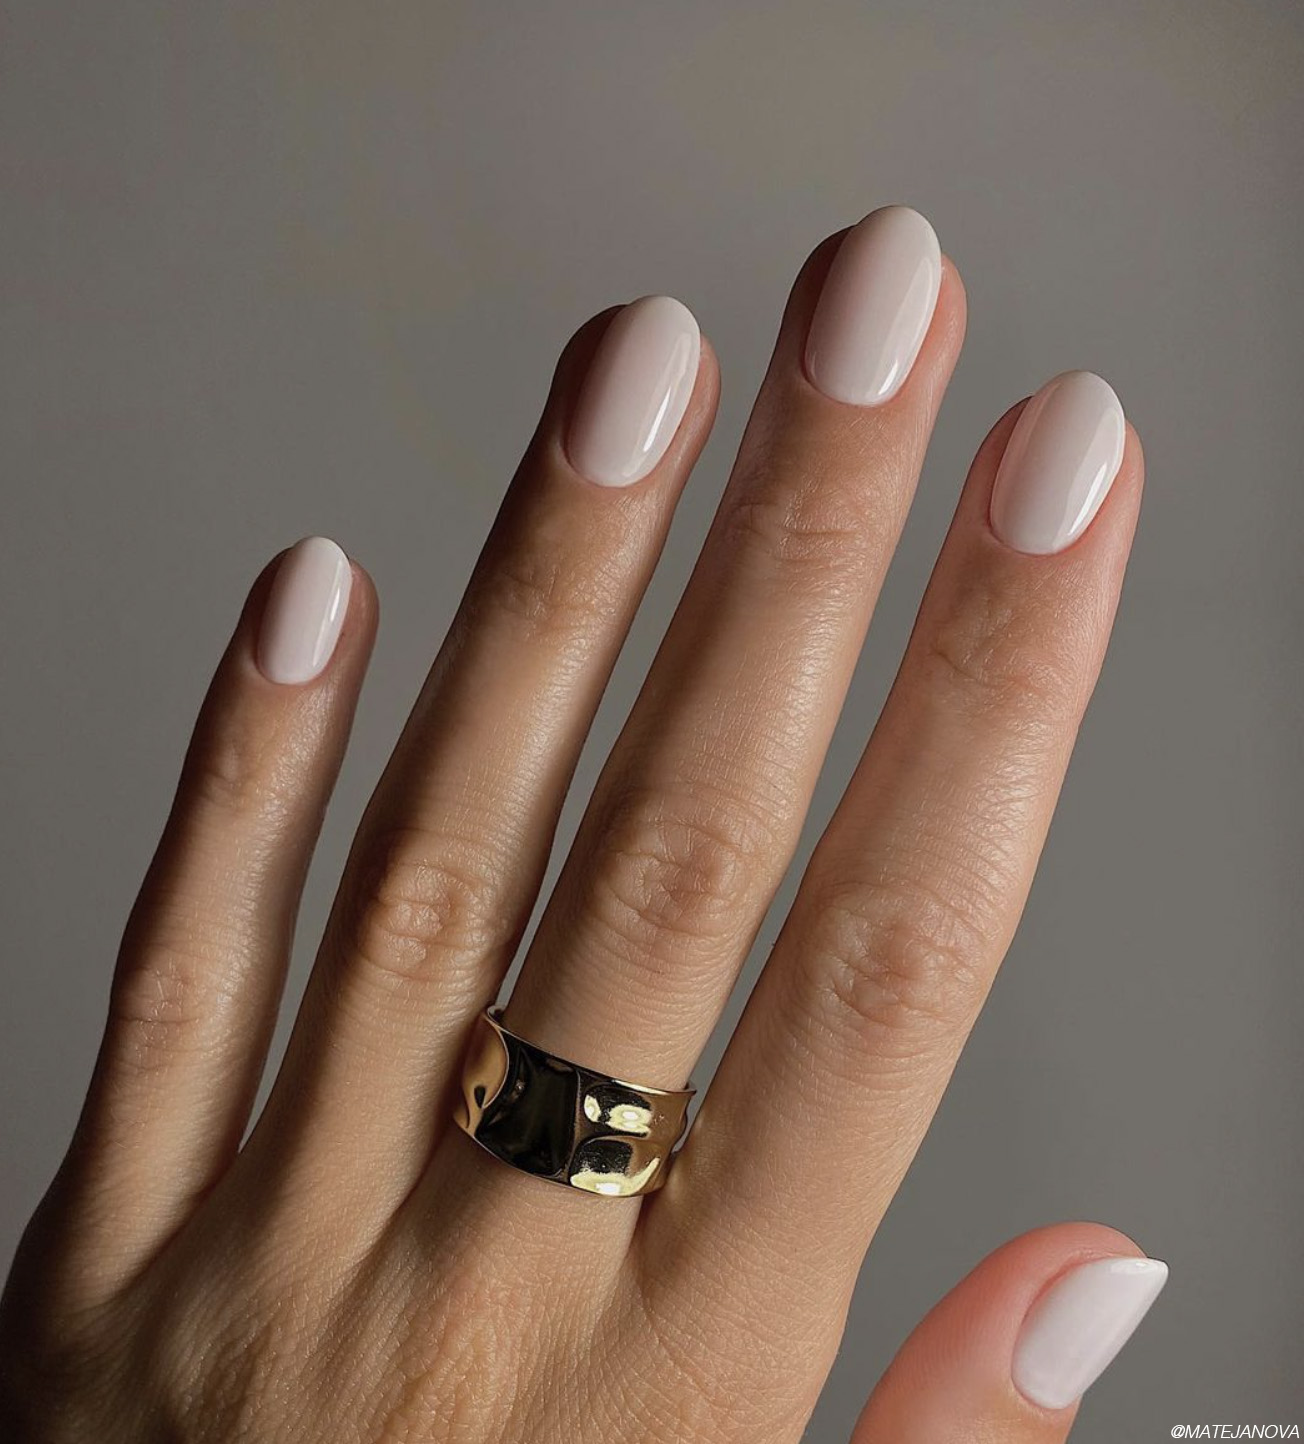 Cloud Nails Are The Perfect Nail Trend for Summer - Bangstyle